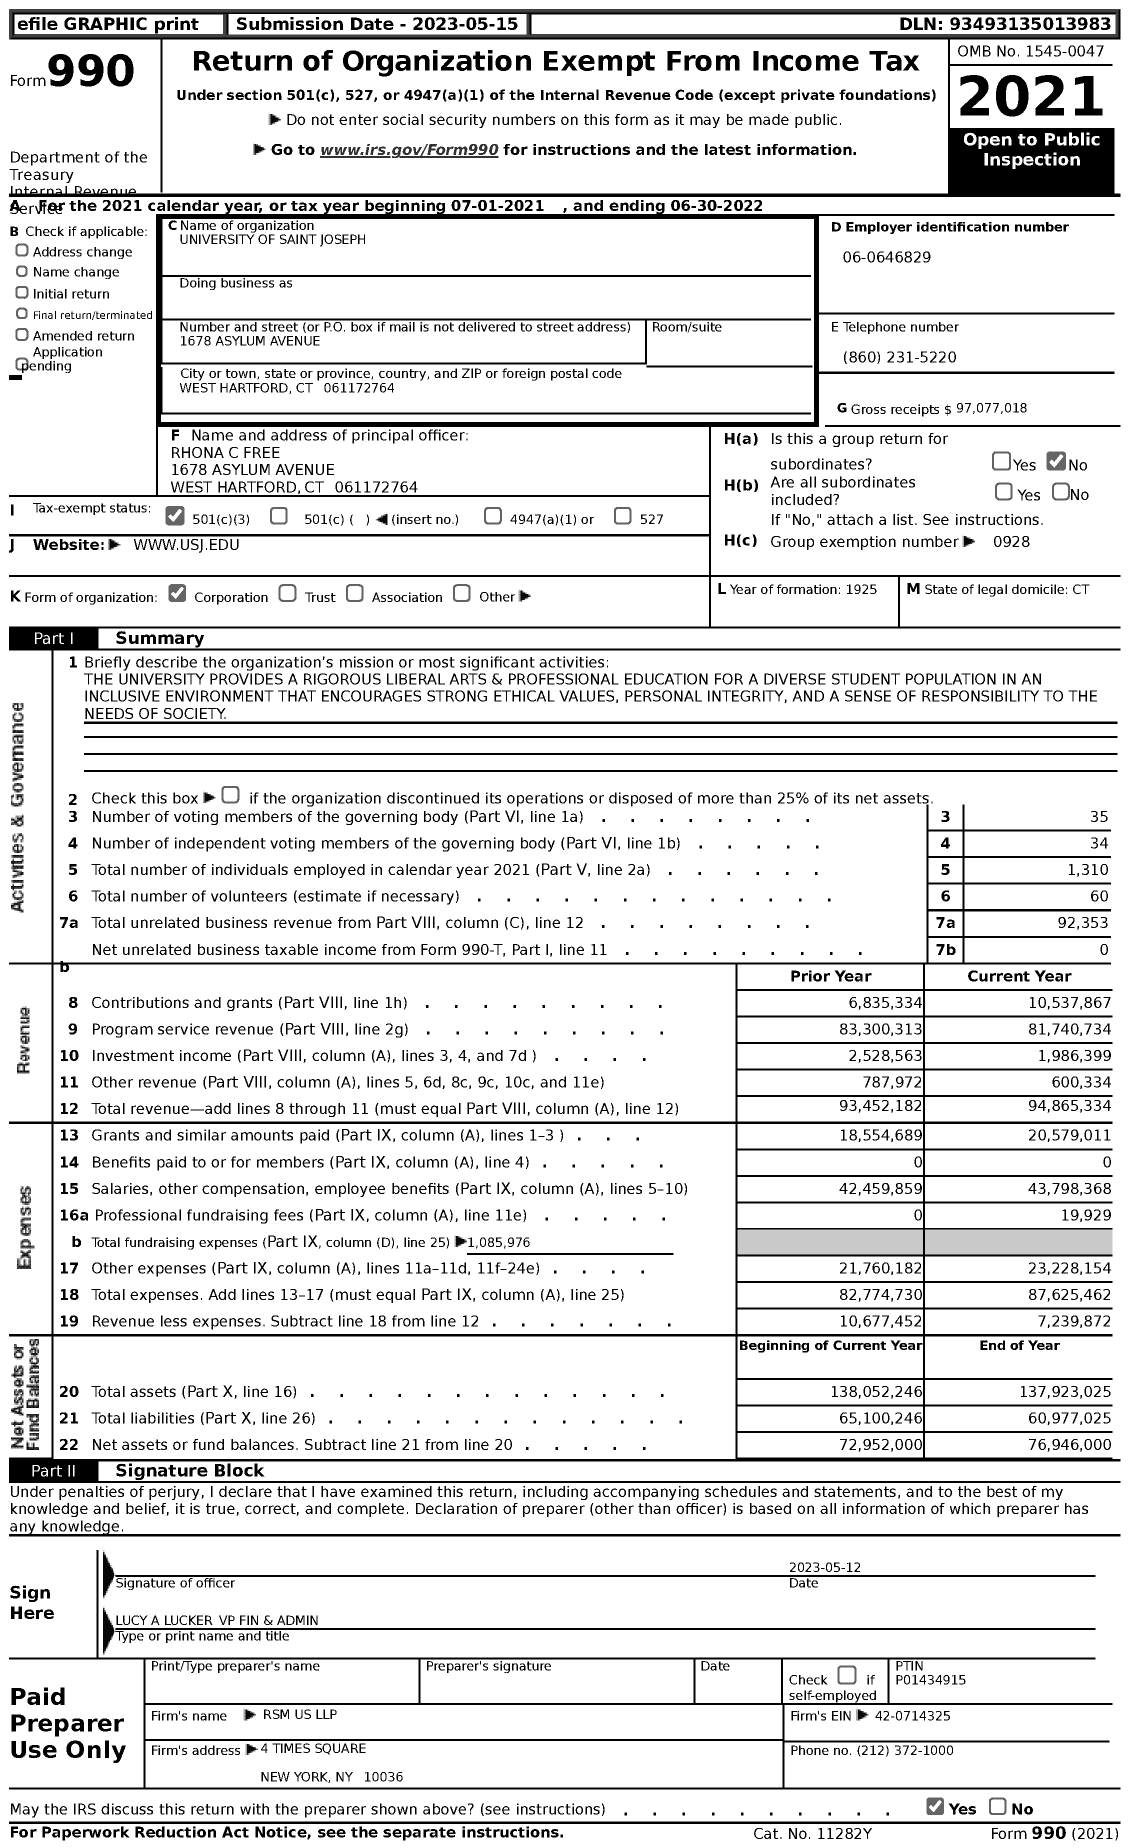 Image of first page of 2021 Form 990 for University of Saint Joseph (USJ)